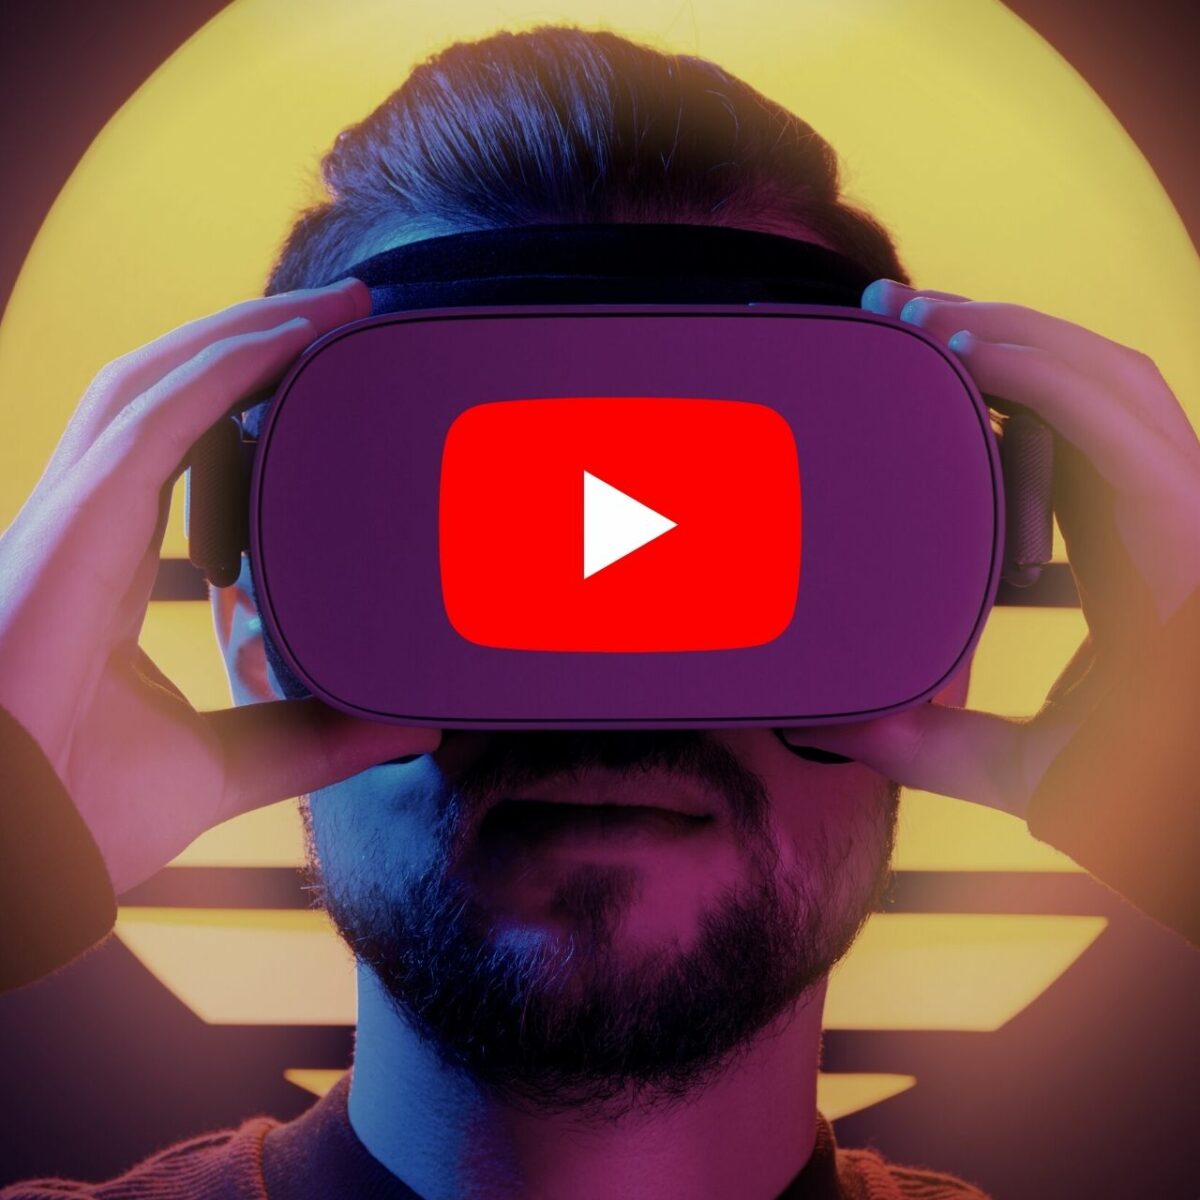 5 Ways to Fix YouTube VR if It's Oculus Quest